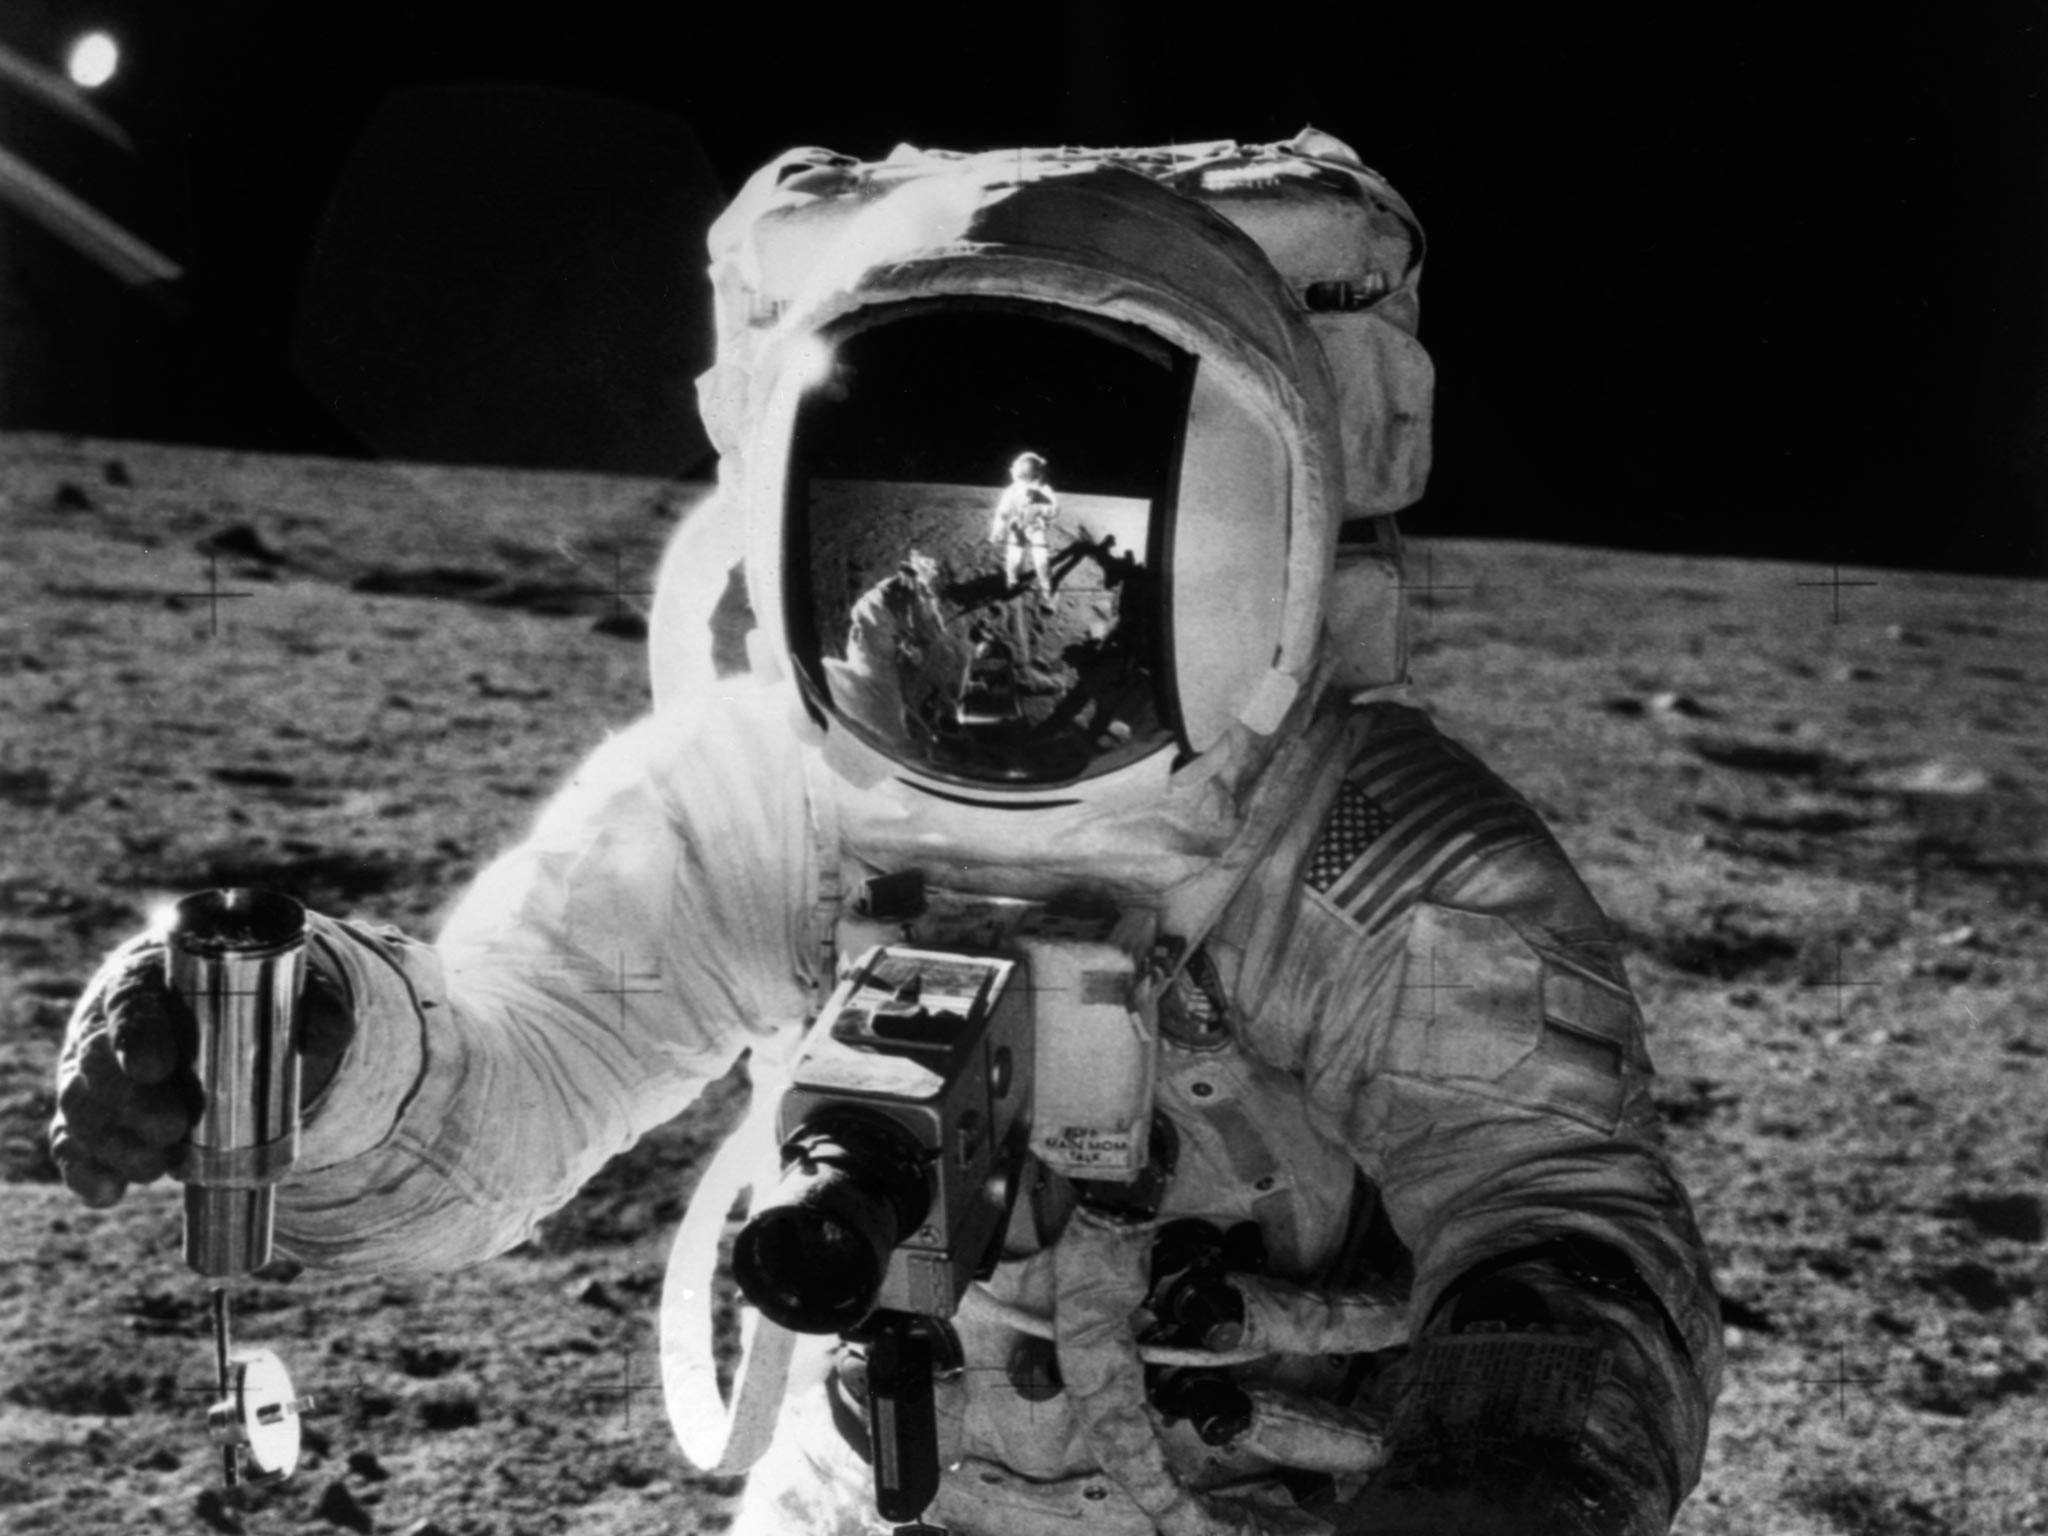 One of the astronauts of the Apollo 12 space mission conducting experiment on the moon's surface